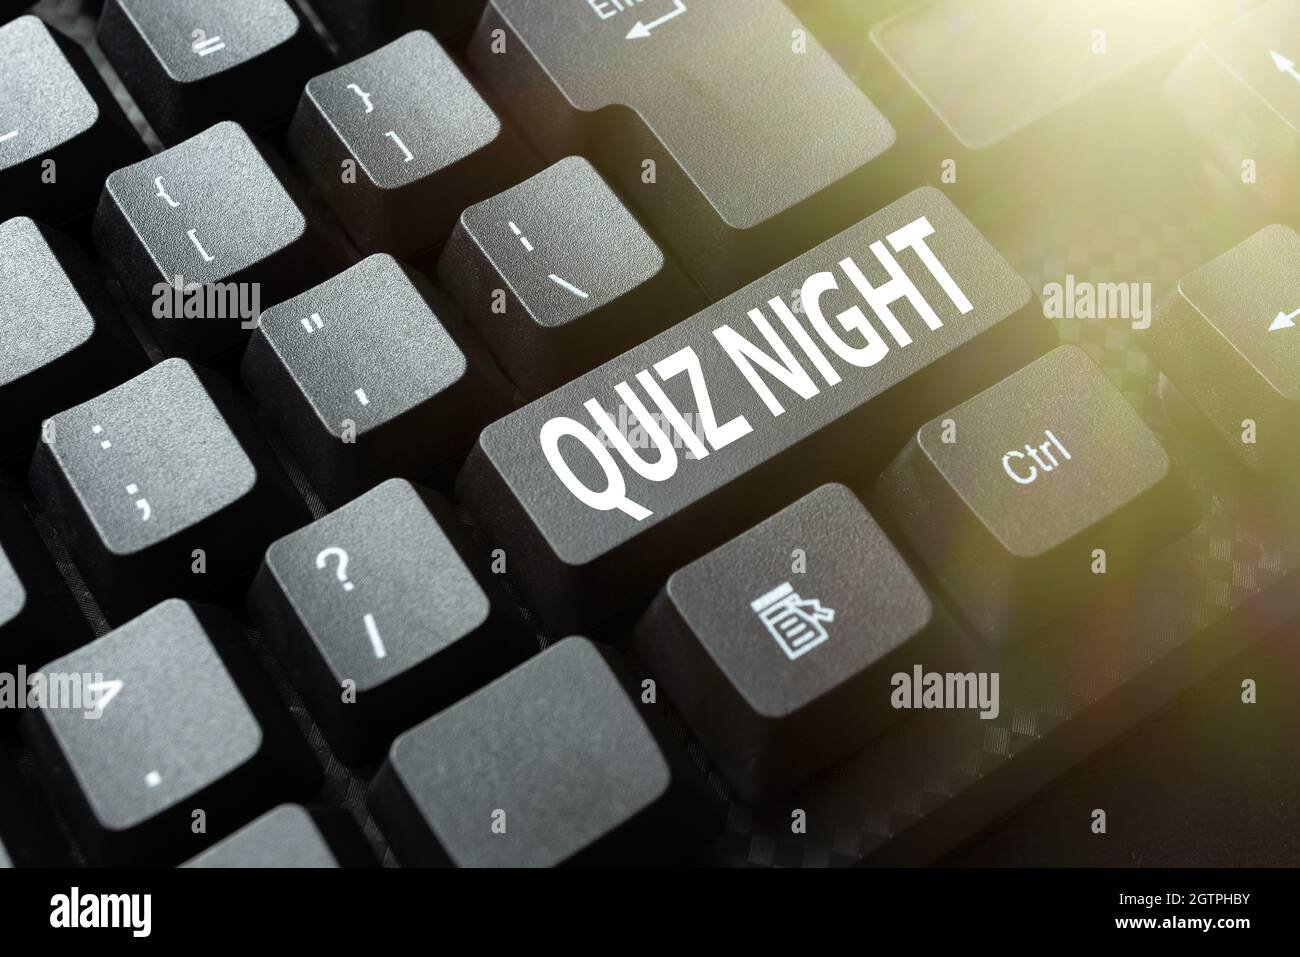 Quiz Show Movie High Resolution Stock Photography and Images - Alamy